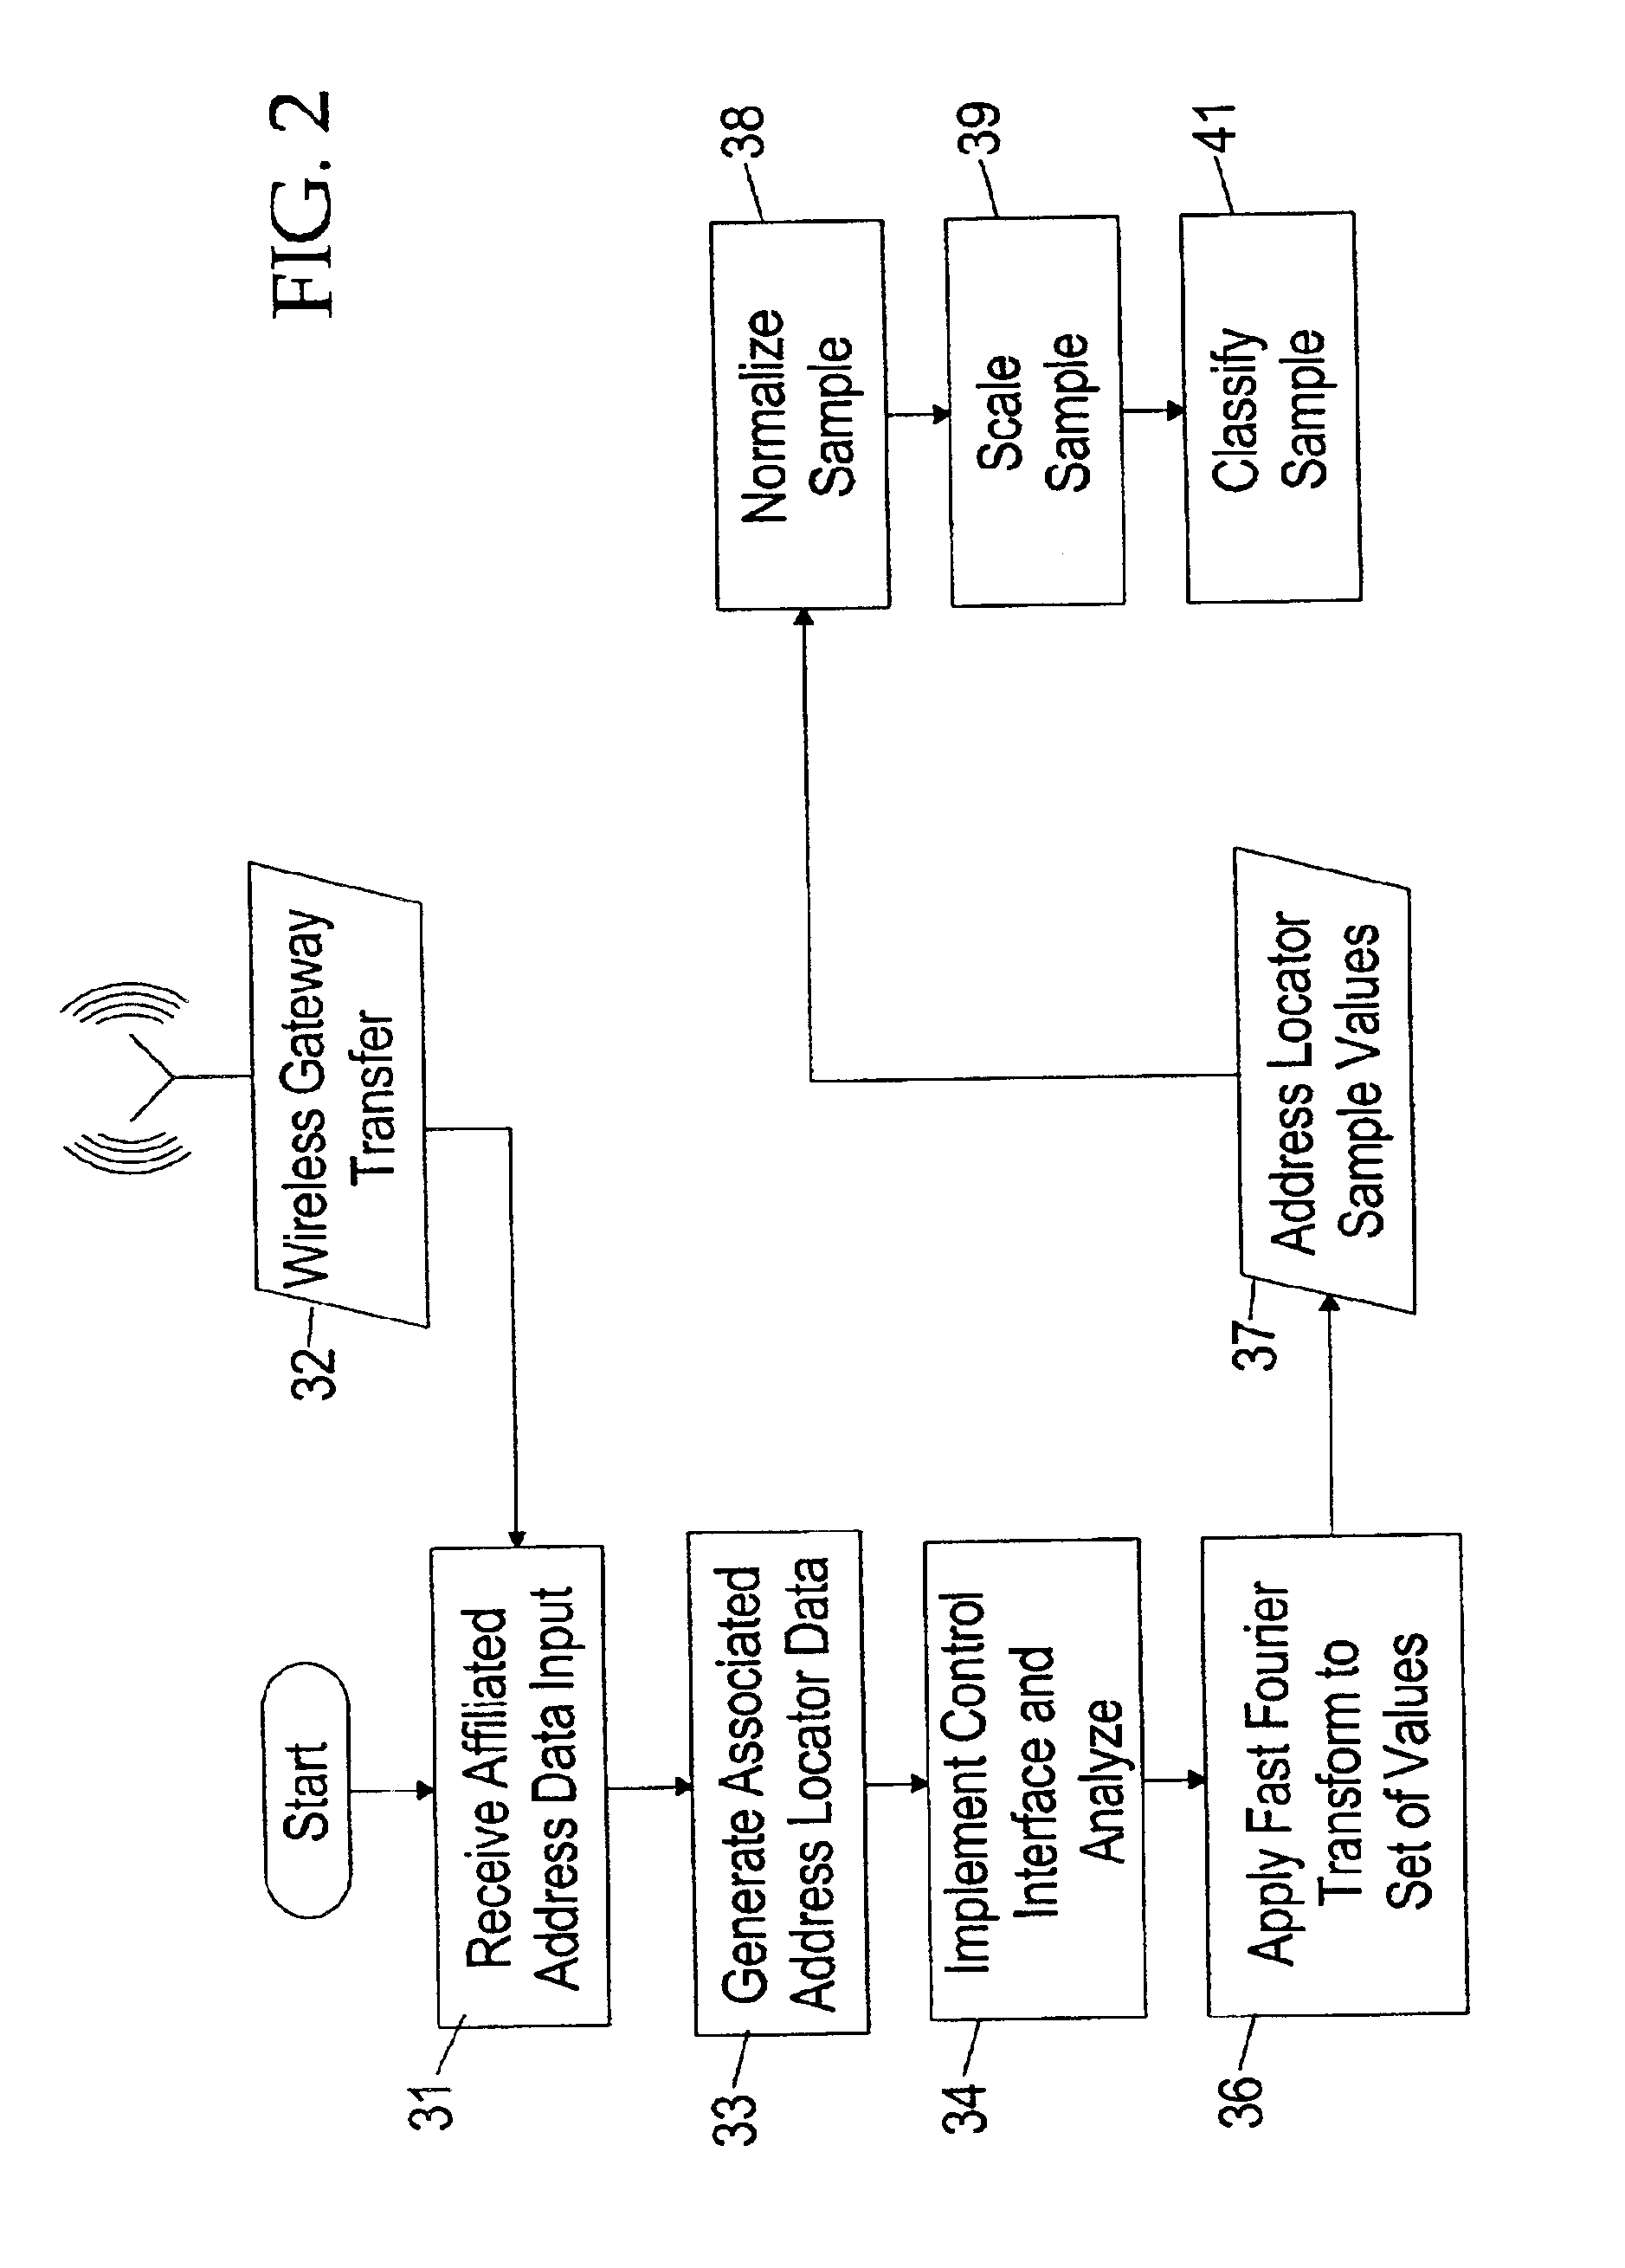 System and method for efficiently accessing affiliated network addresses from a wireless device